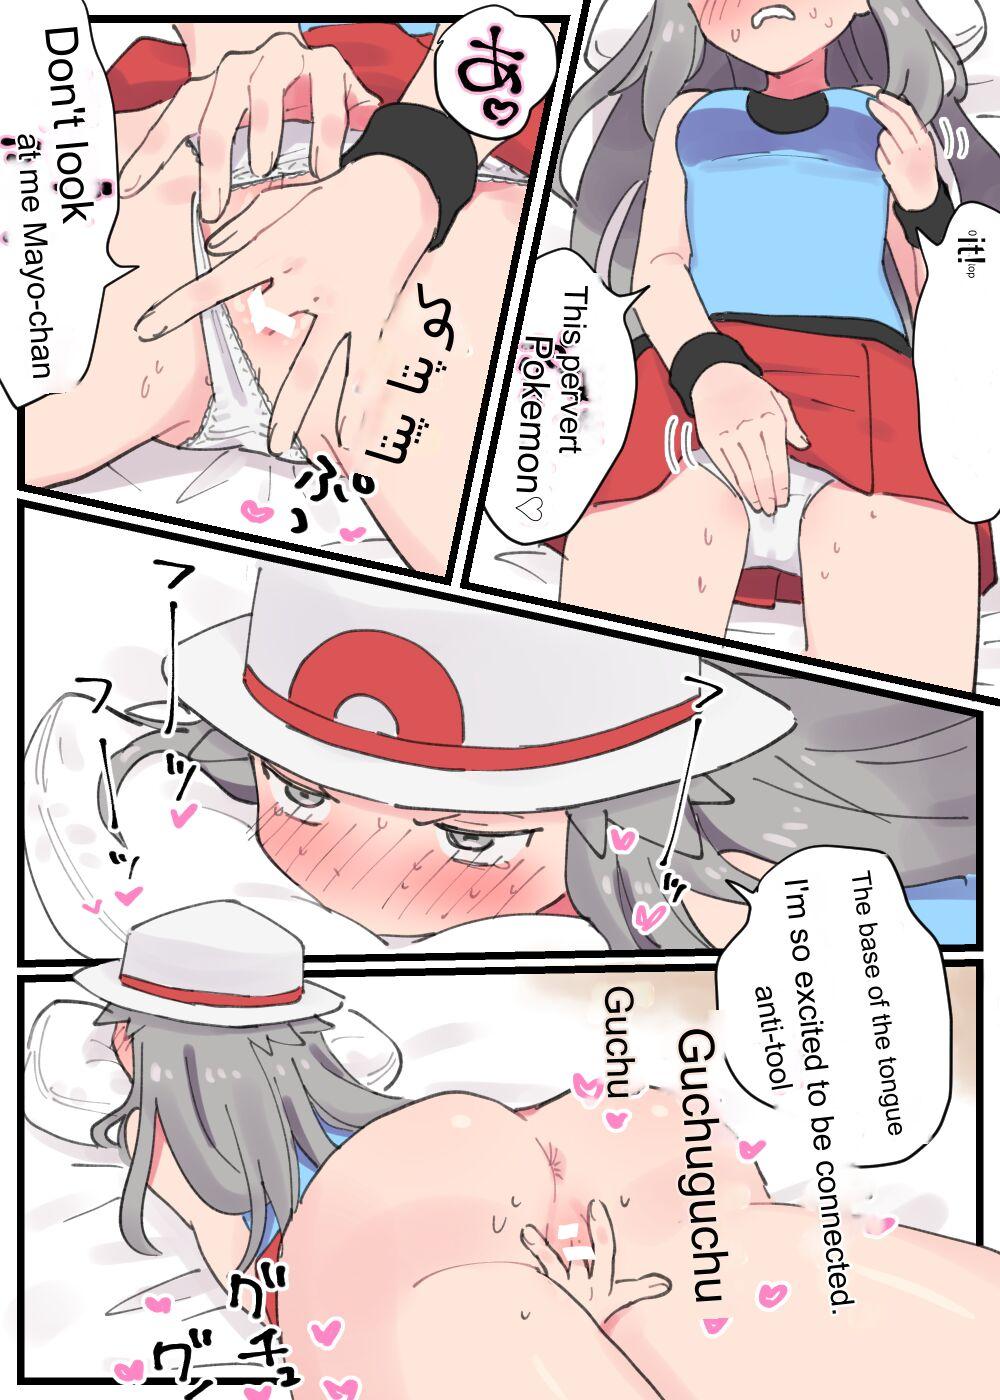 Hardcore Fucking Leaf goes to help Mayo-chan and gets hypnotically raped by Hypno - Pokemon | pocket monsters Japan - Page 9